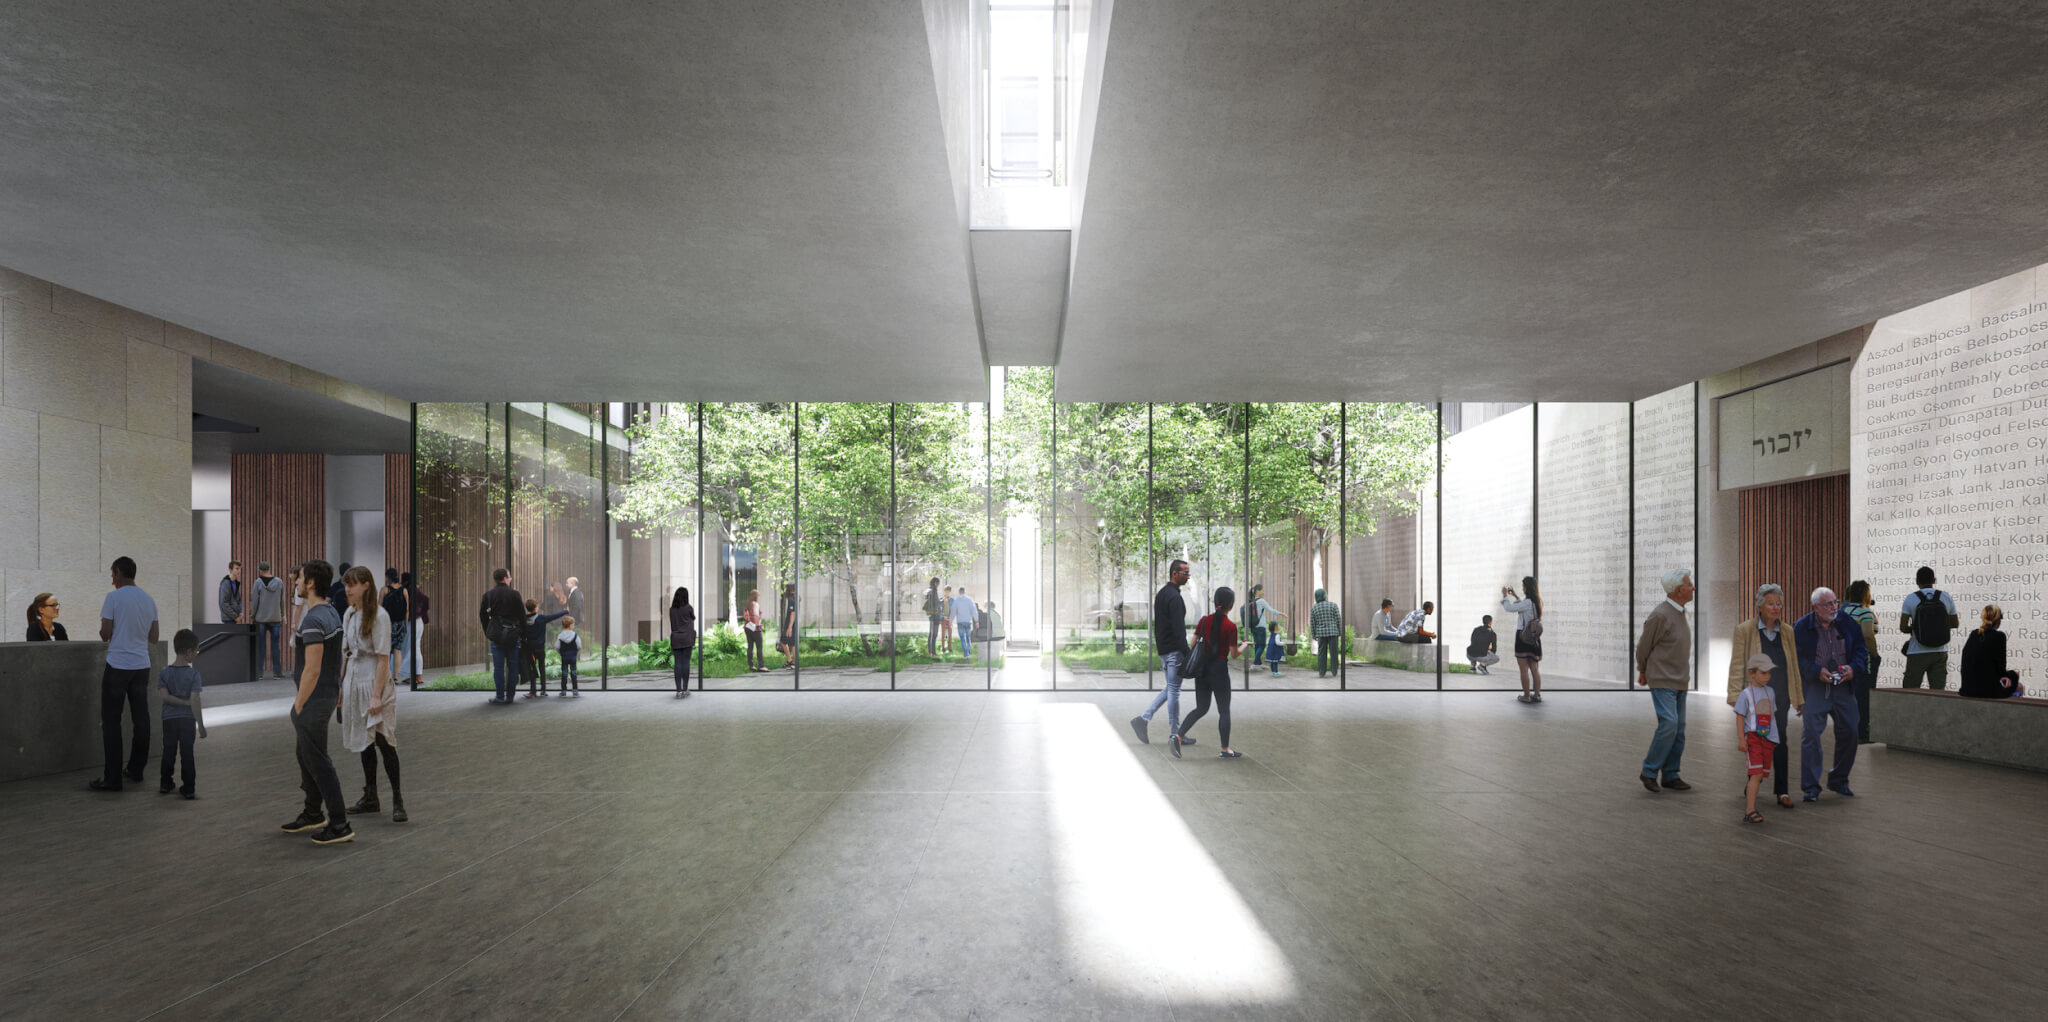 rendering of a large open gallery space in a museum